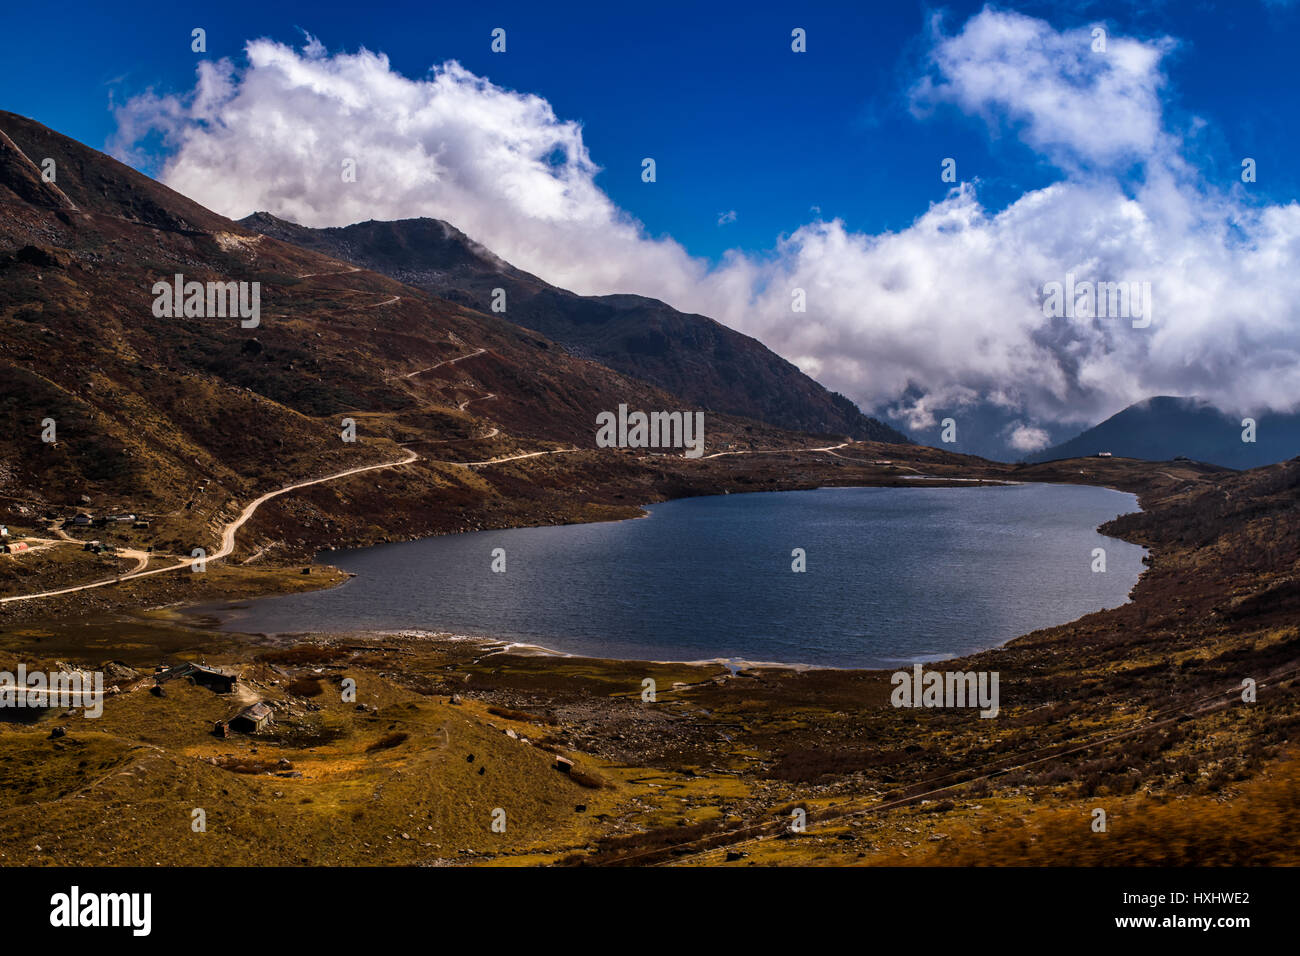 The great elephant lake of east Sikkim, India. The lake is at above 14000 ft in the Himalayan range. Stock Photo